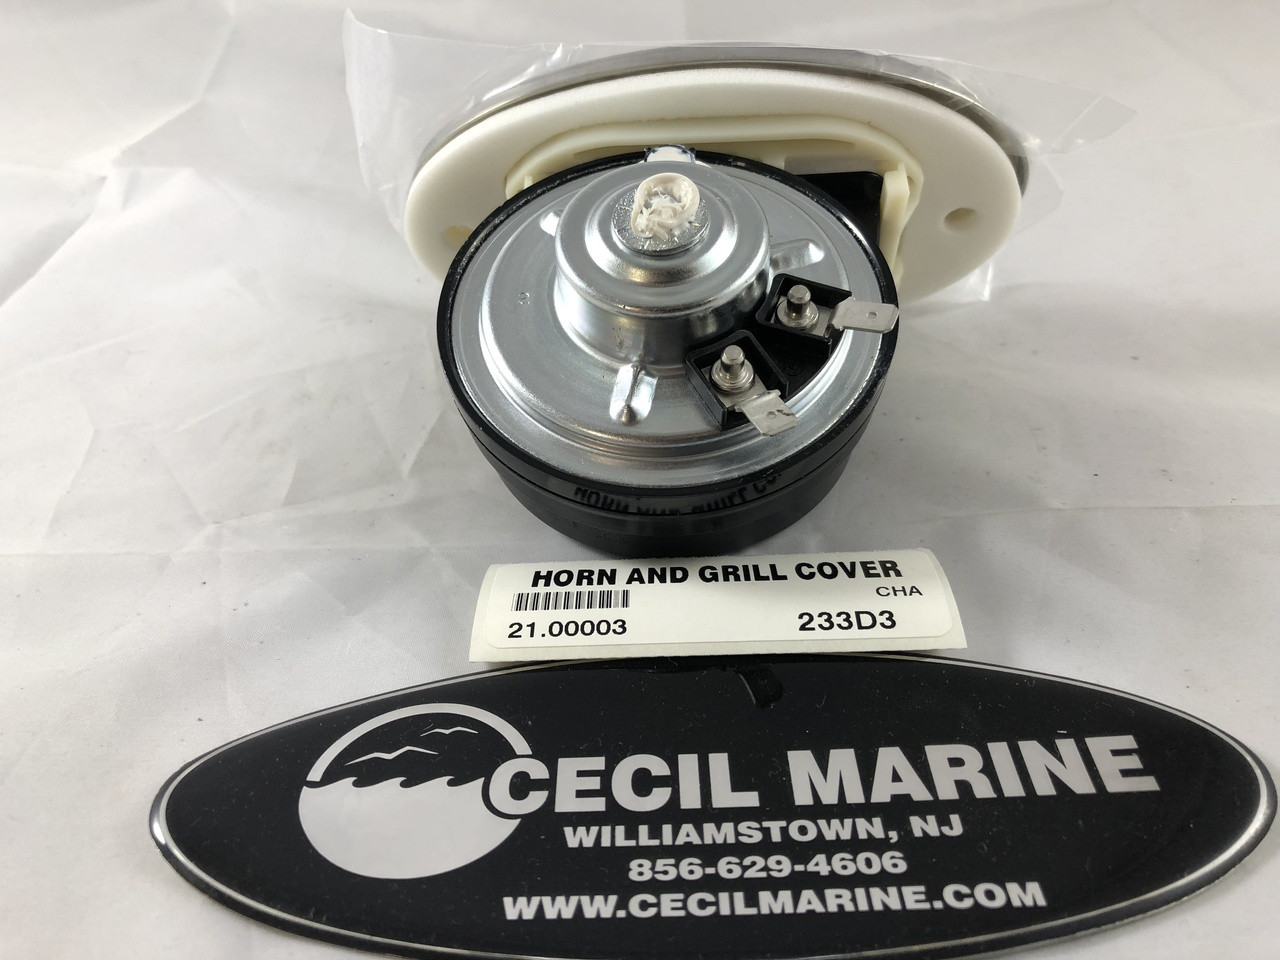 Experience a Different Boating Experience at Cecil Marine